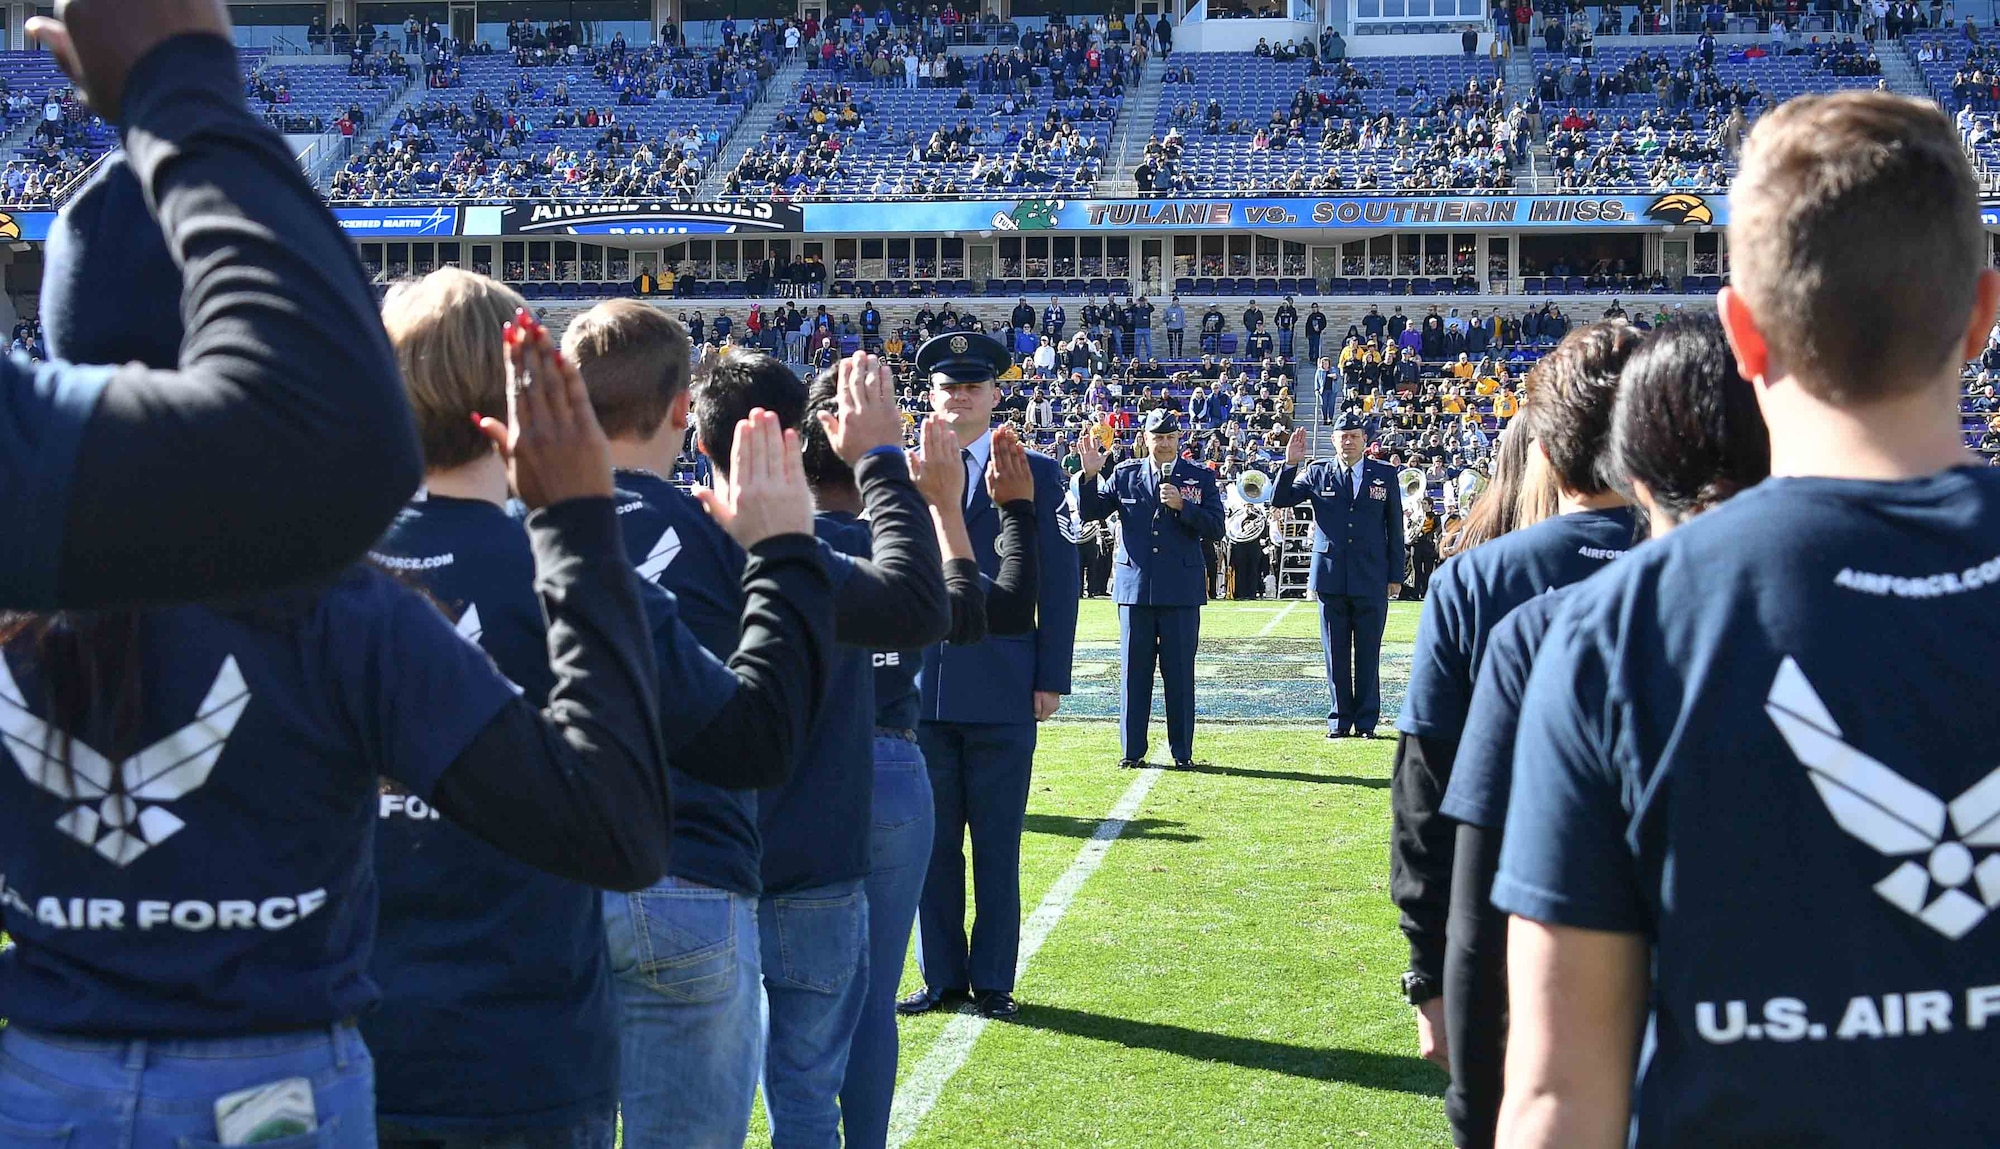 Tenth Air Force Commander Maj. Gen. Brian Borgen administers the oath of enlistment to 125 recruits during halftime at the Lockheed Martin Armed Forces Bowl on January 4, 2020 at Amon G. Carter Stadium in Fort Worth, Texas. The United States Army, Marines, Navy, Air Force and Coast Guard were represented by providing 25 recruits each who will join Active Duty, the National Guard and the Reserve. (U.S. Air Force photo by Jeremy Roman)